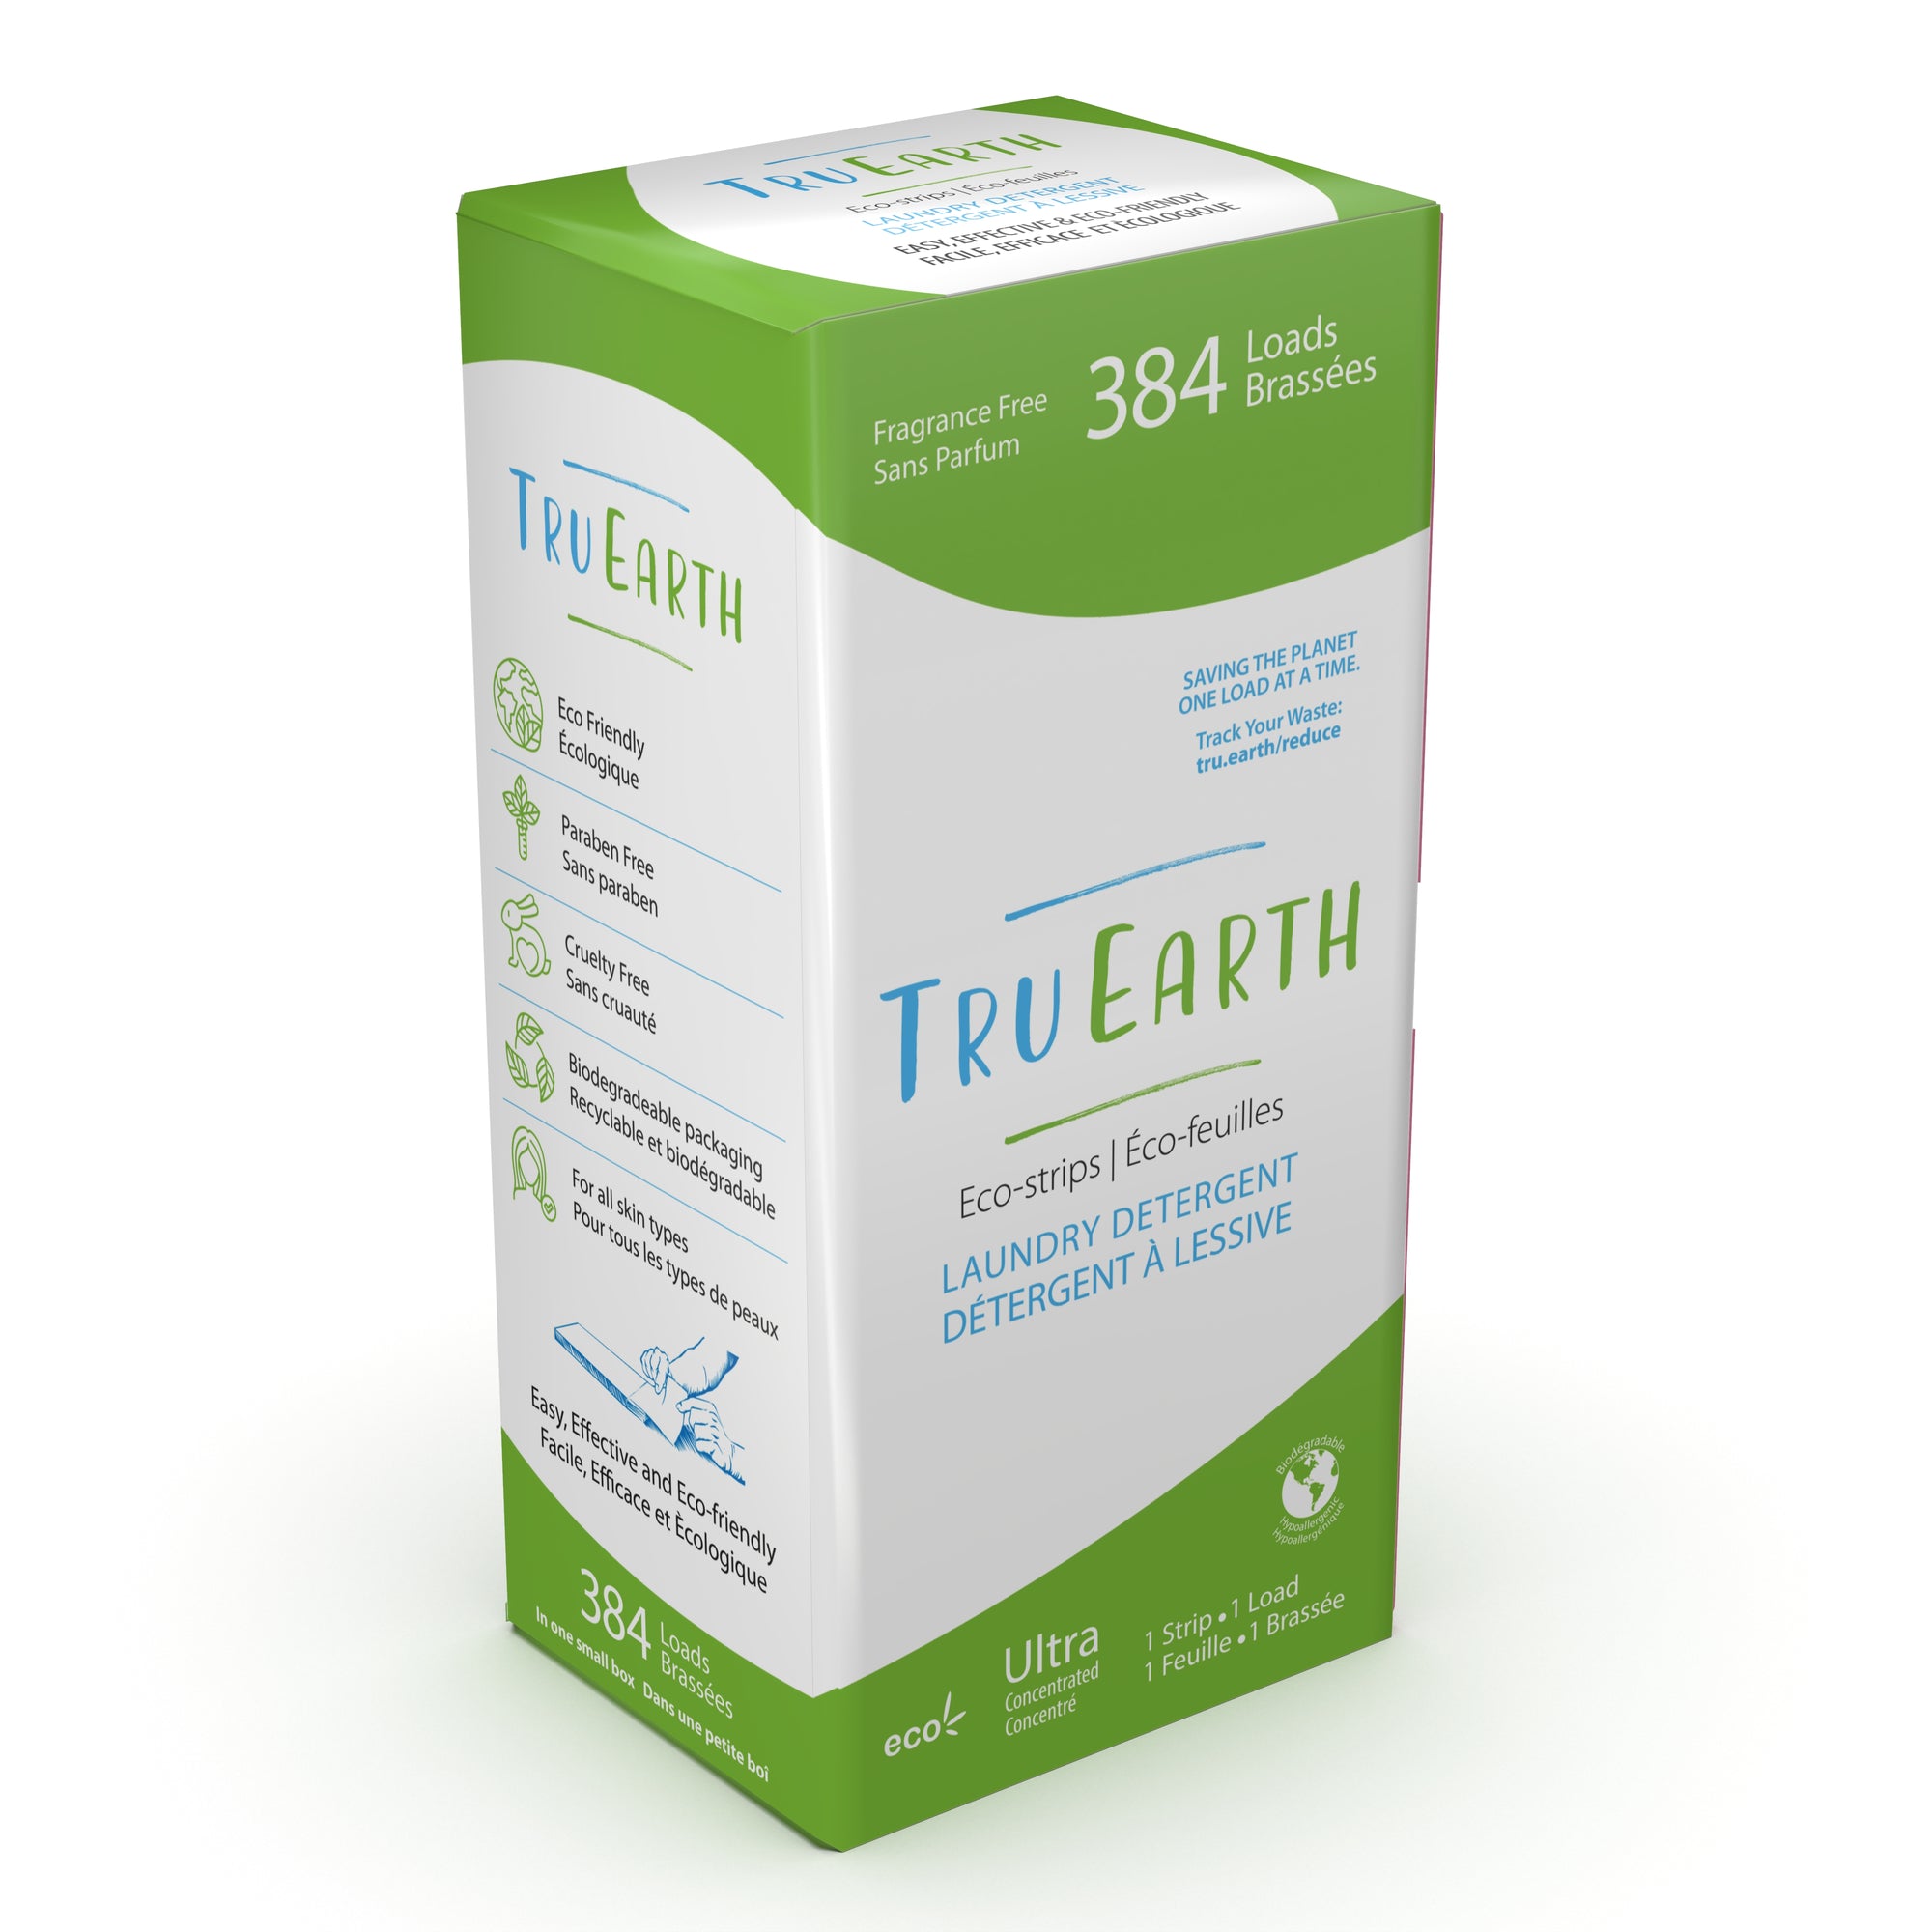 Tru Earth Fragrance Free 384 pack, in stock now